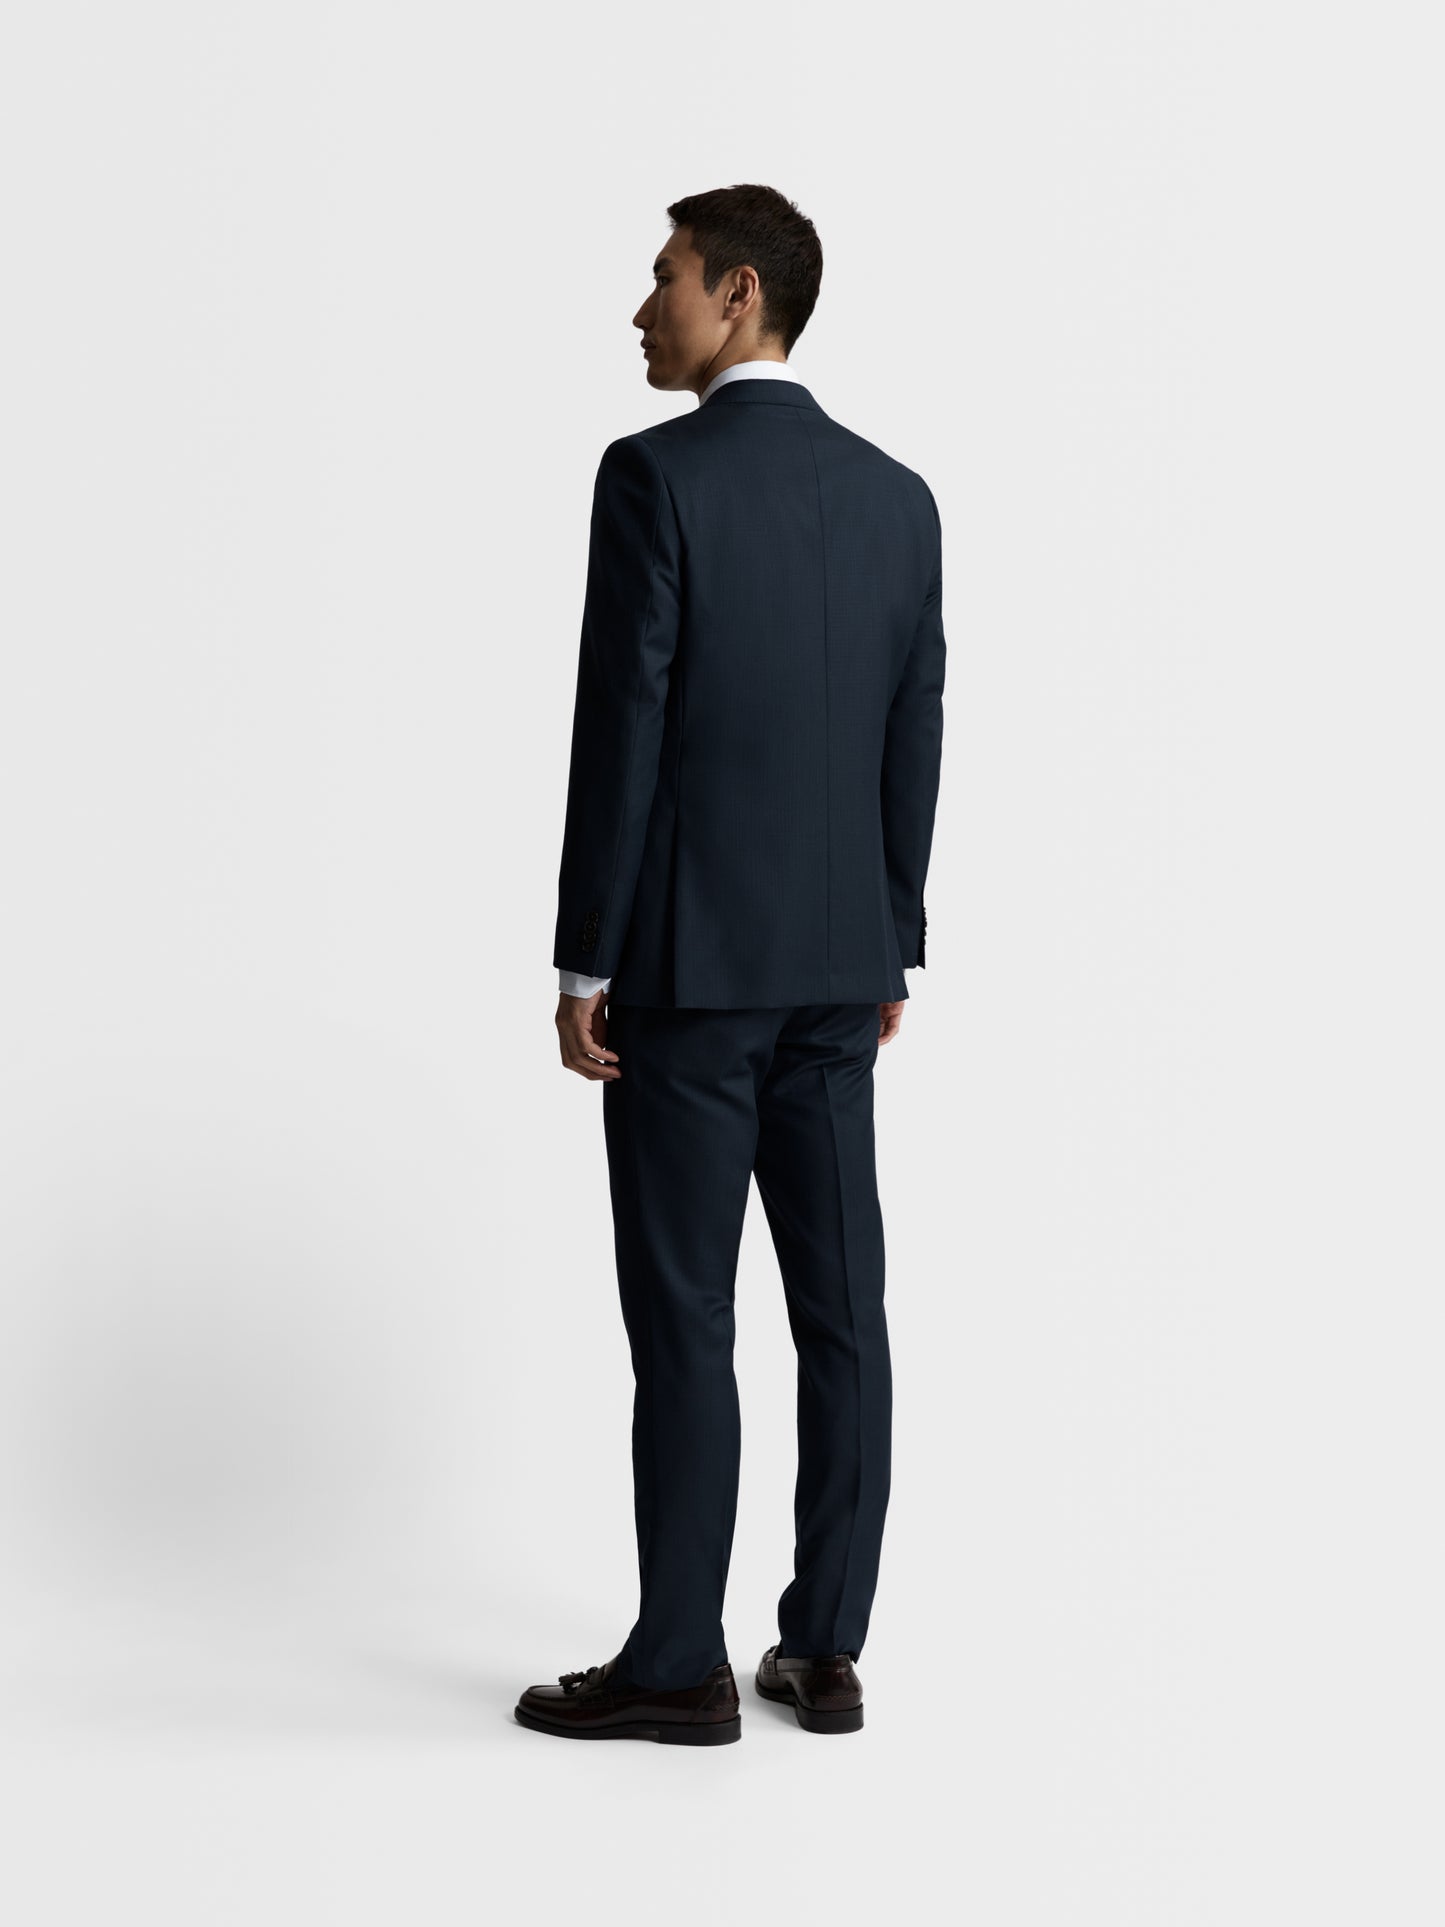 Image 4 of Maxwell Infinity Active Slim Fit Navy Textured Jacket